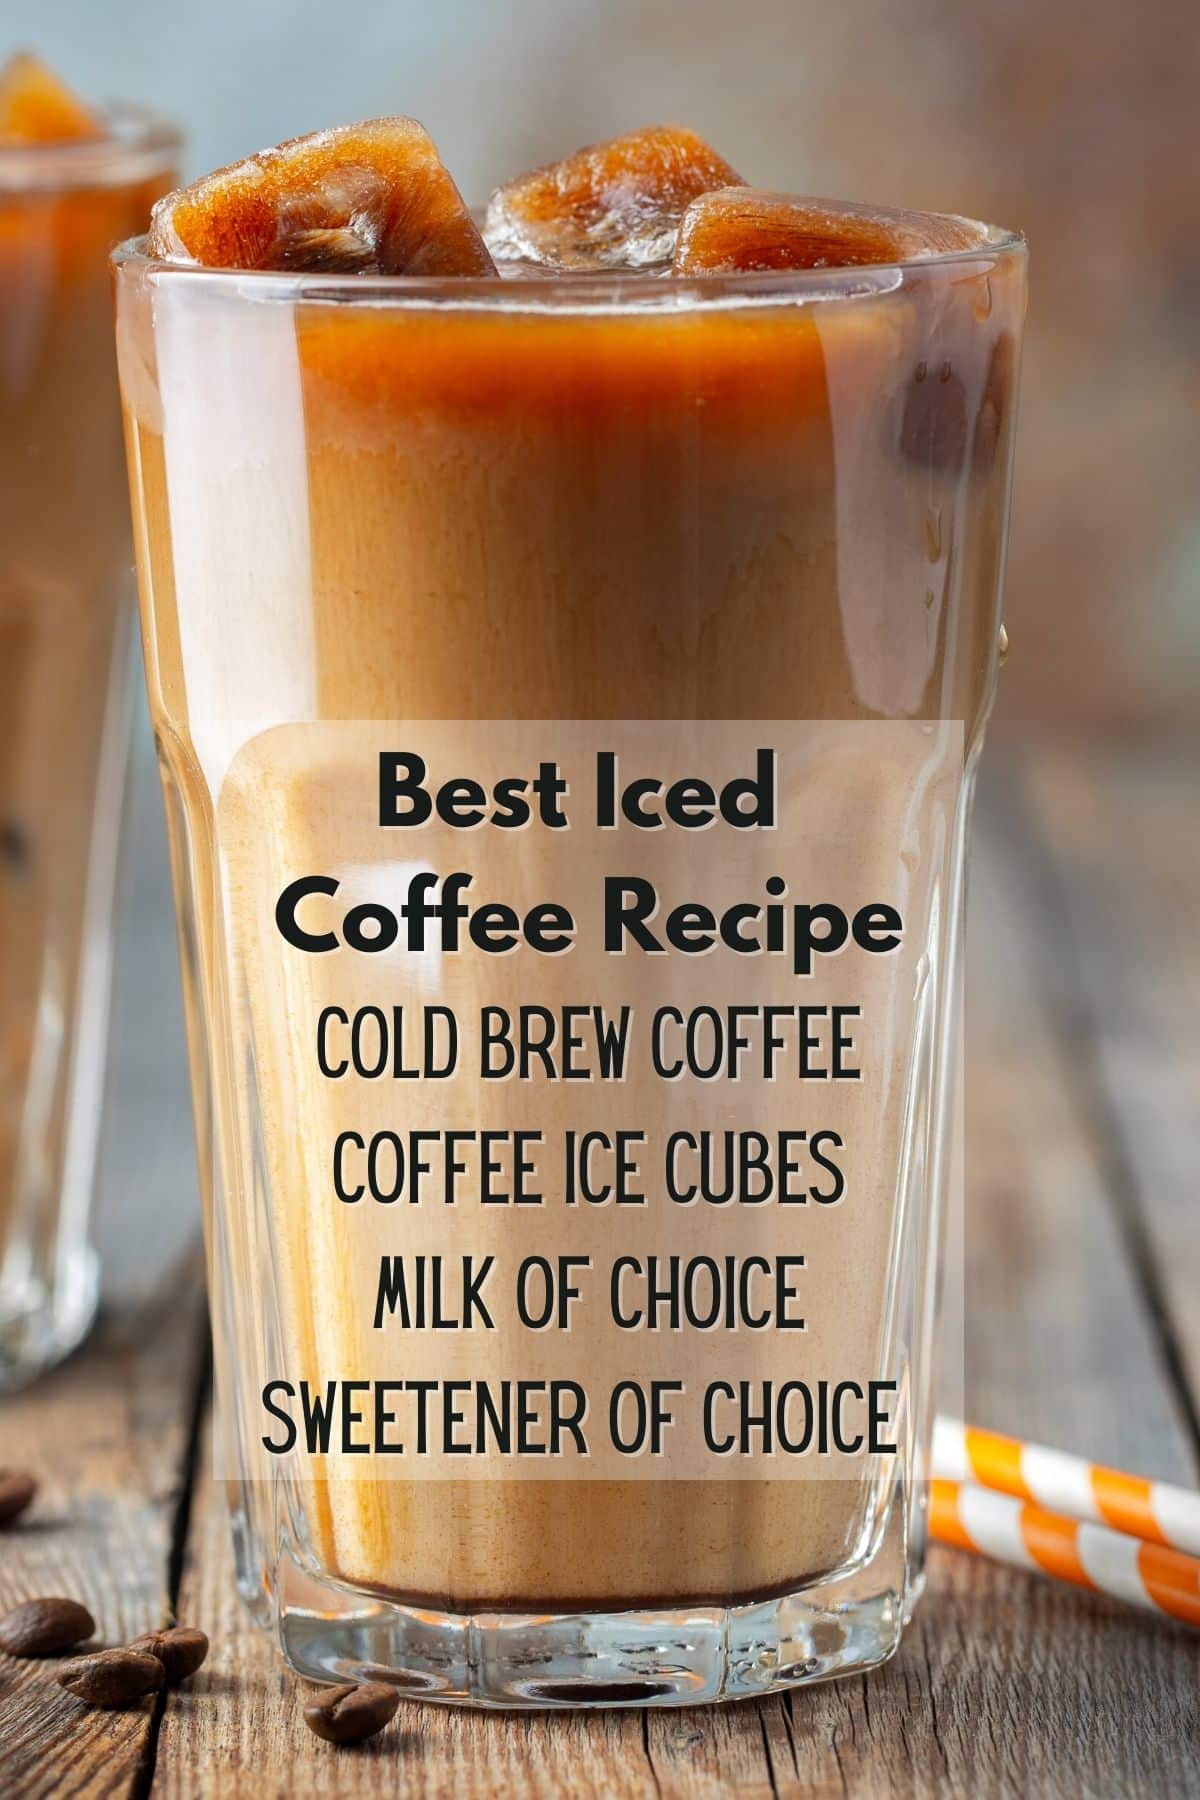 https://www.cleaneatingkitchen.com/wp-content/uploads/2022/05/Copy-of-iced-coffee-infographic.jpg